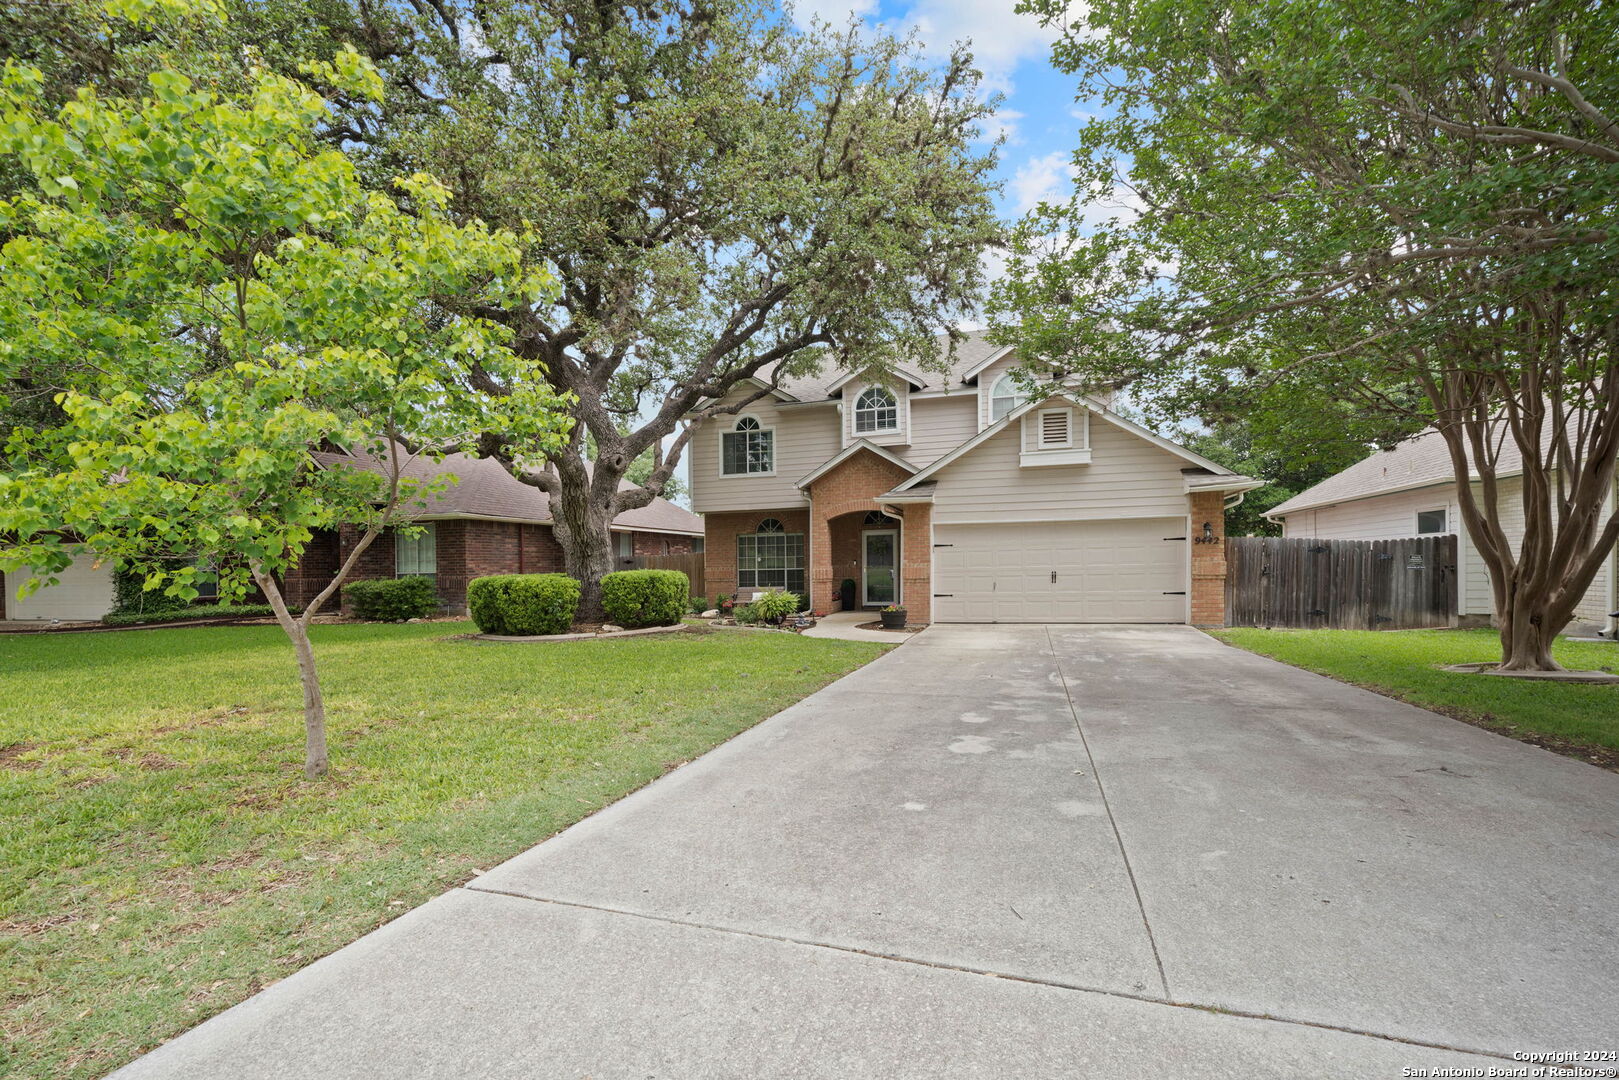 Photo of 9442 Tranquil Park Dr in San Antonio, TX